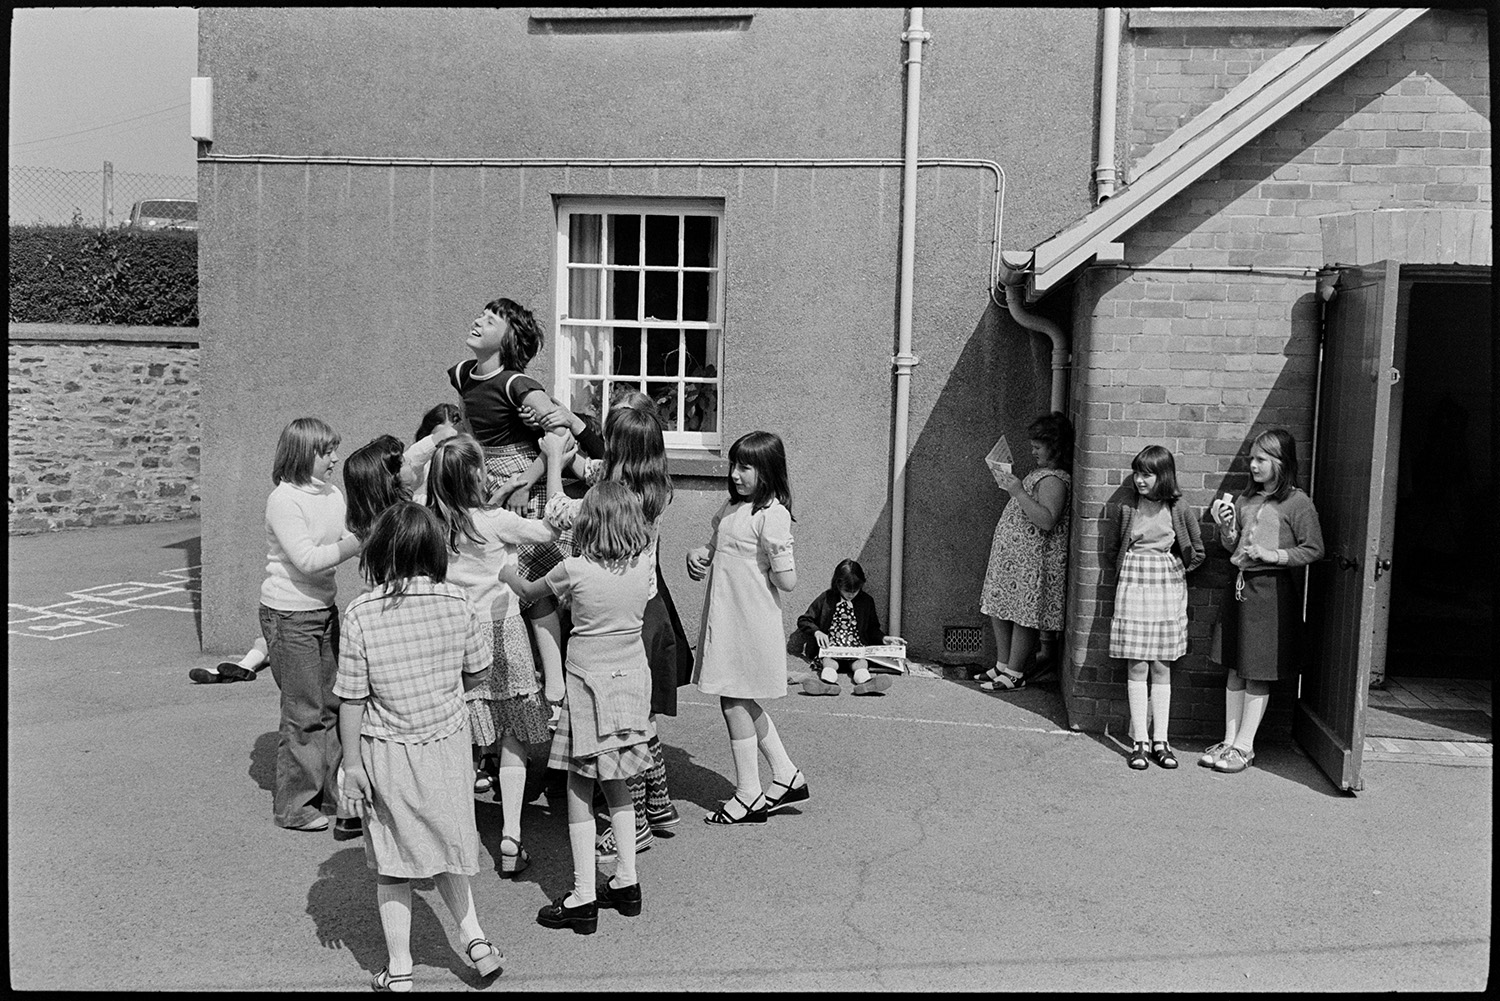 Children at break time, having free milk and playing outside. 
[Children playing in the playground at Blue Coats School in Torrington at break time. They are lifting up one of their classmates. In the background one child is reading and another is eating a banana.]